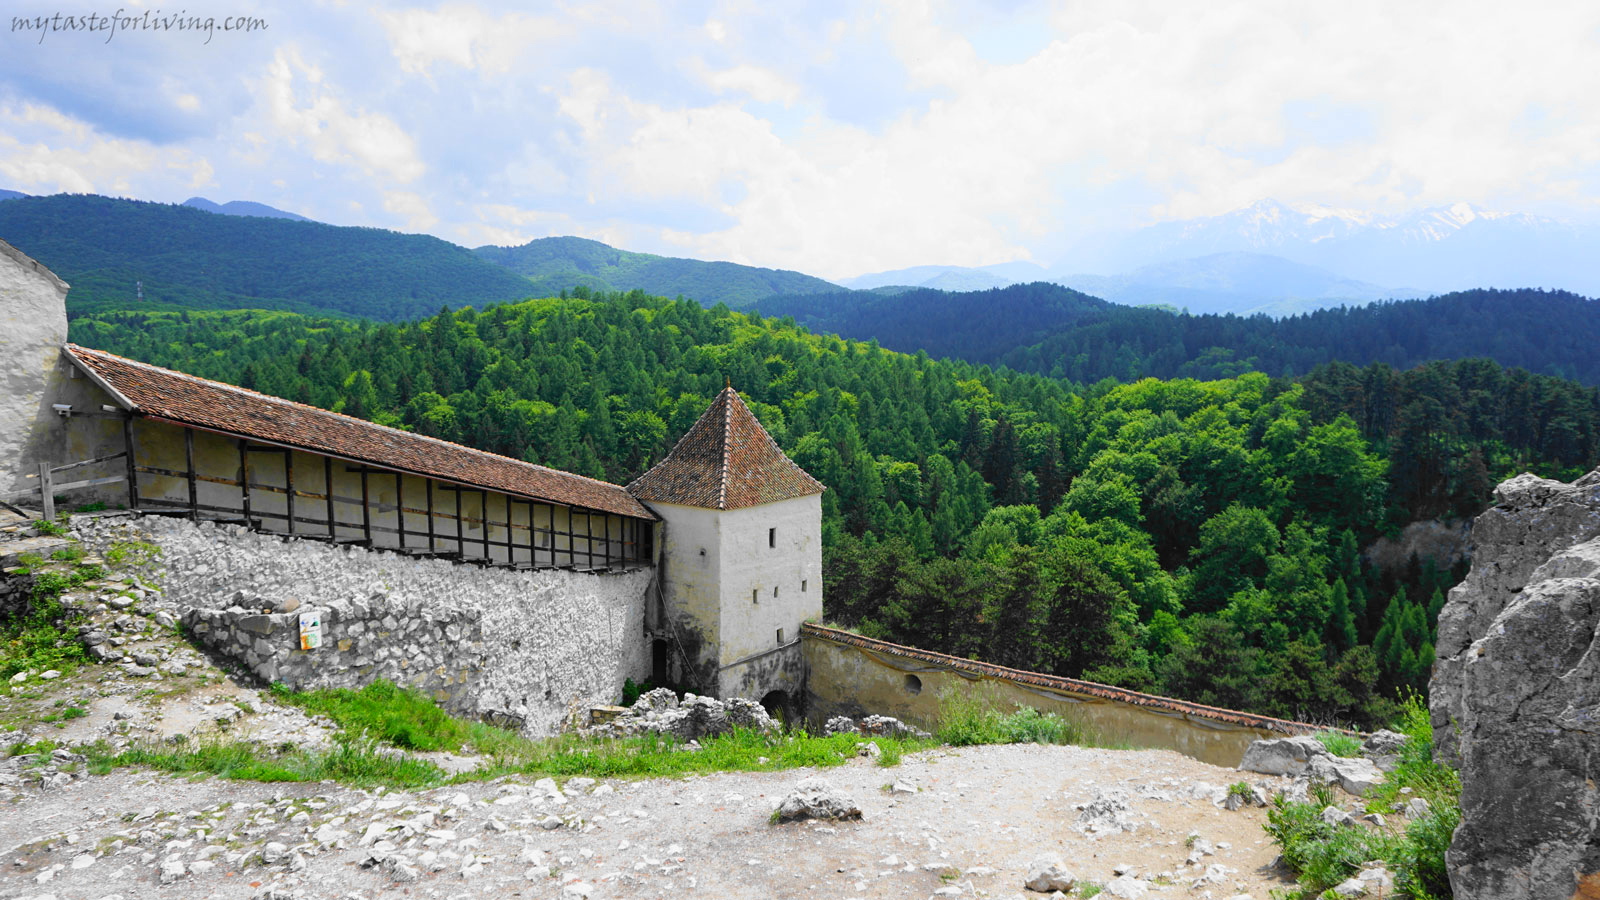 Located near Brasov, 200 meters above the town of Rasnov, on the top of a rocky hill, the Rasnov fortress is one of the most visited medieval attractions in Romania.